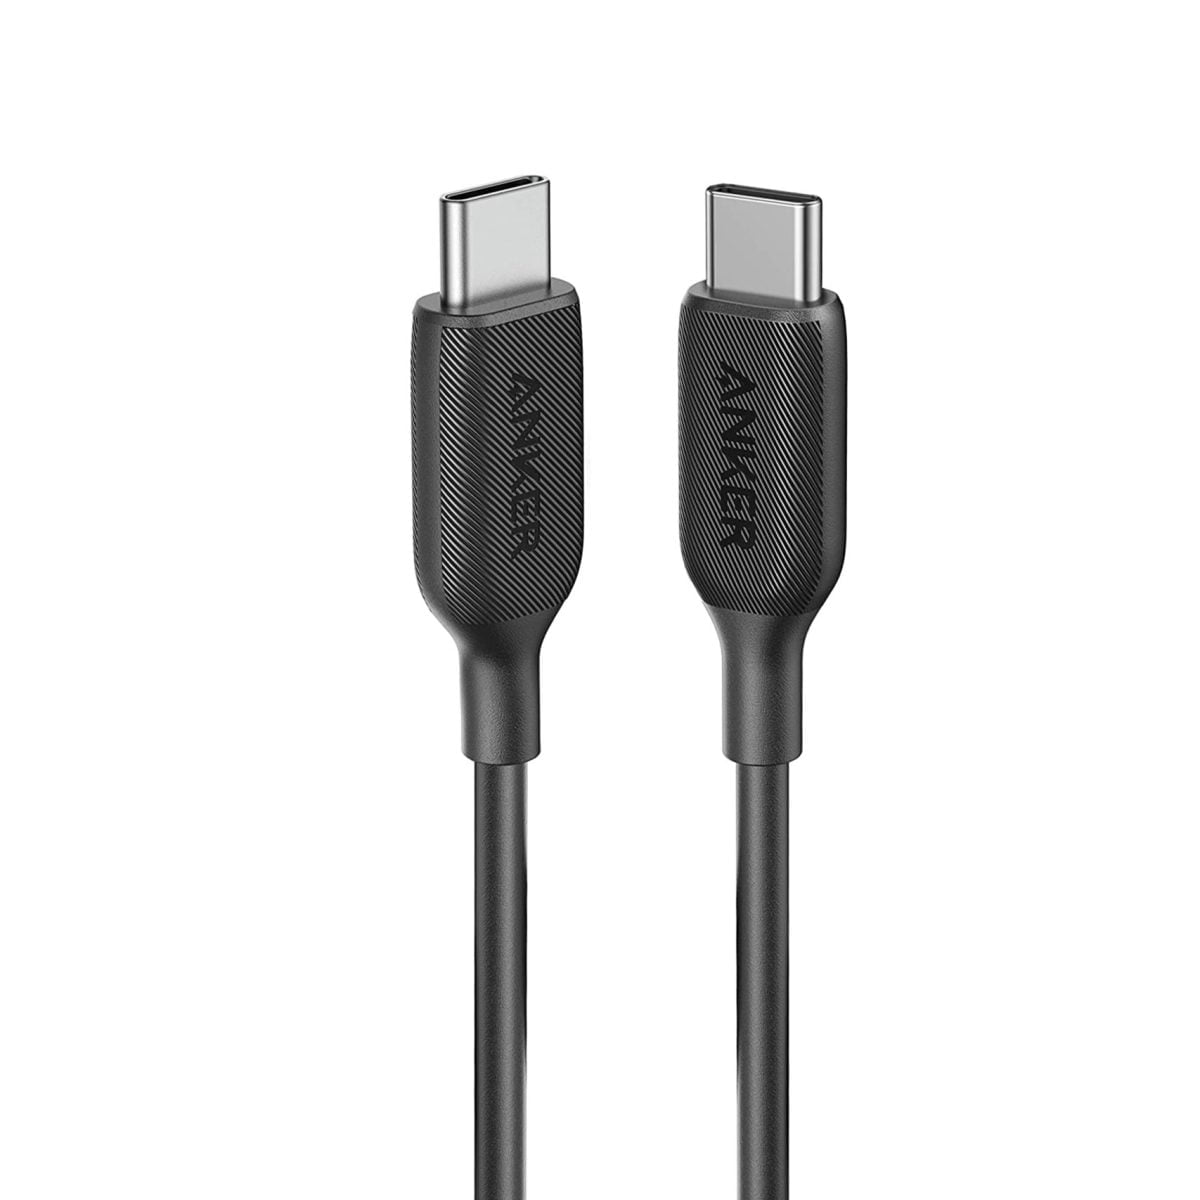 Anker Powerline Iii Usb-C To Usb-C Cable 2.0